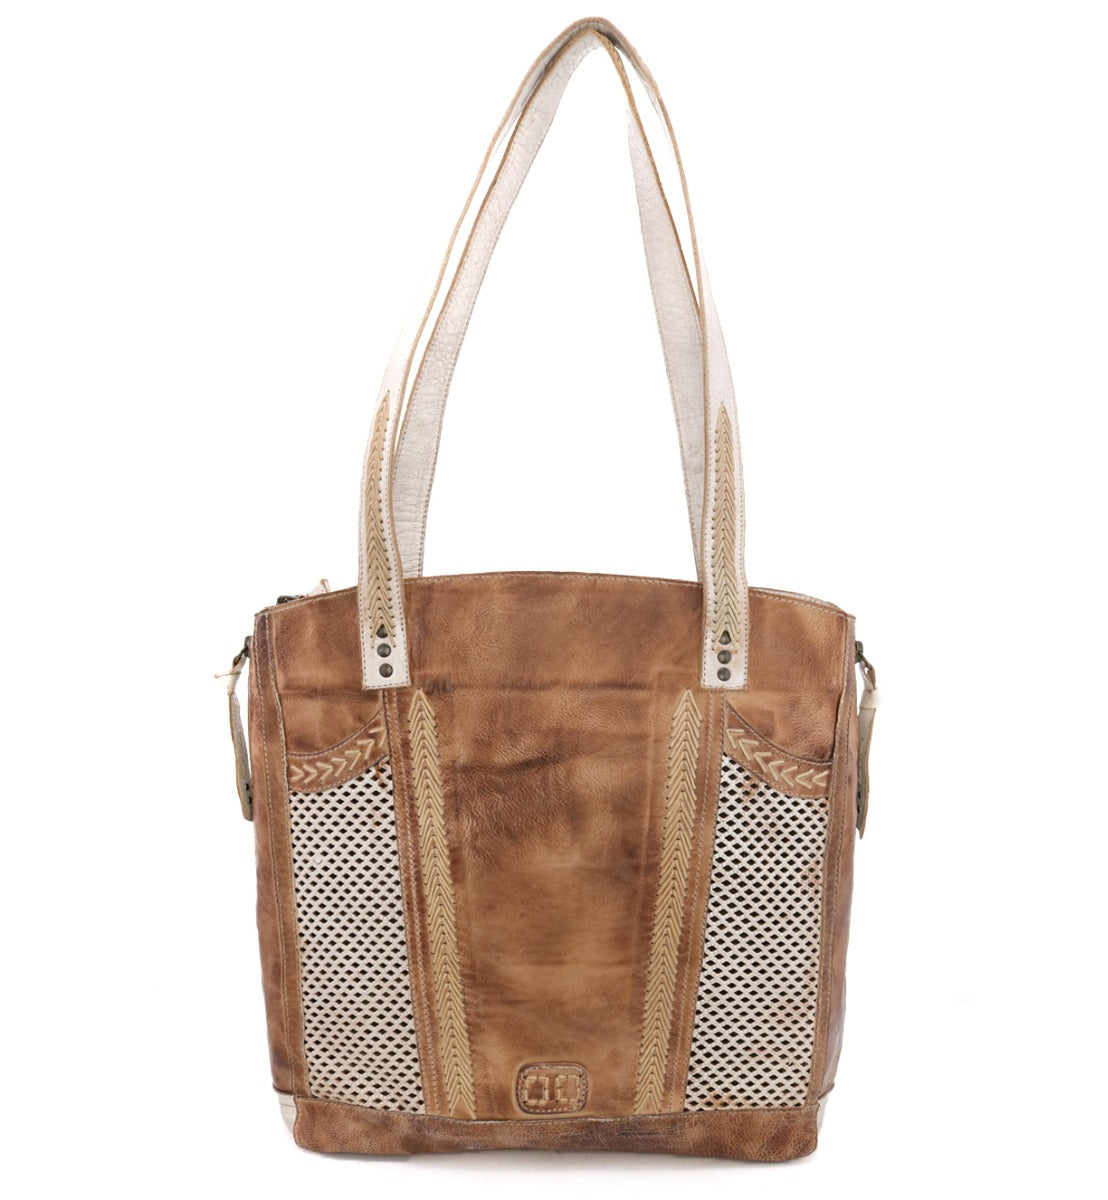 An Amelie leather tote bag with mesh detailing. (Brand: Bed Stu)